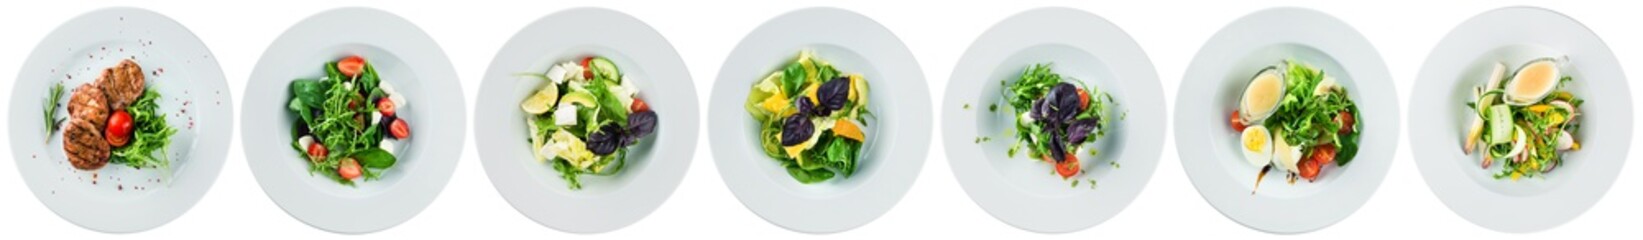 set summer salads from vegetables and fruits isolated